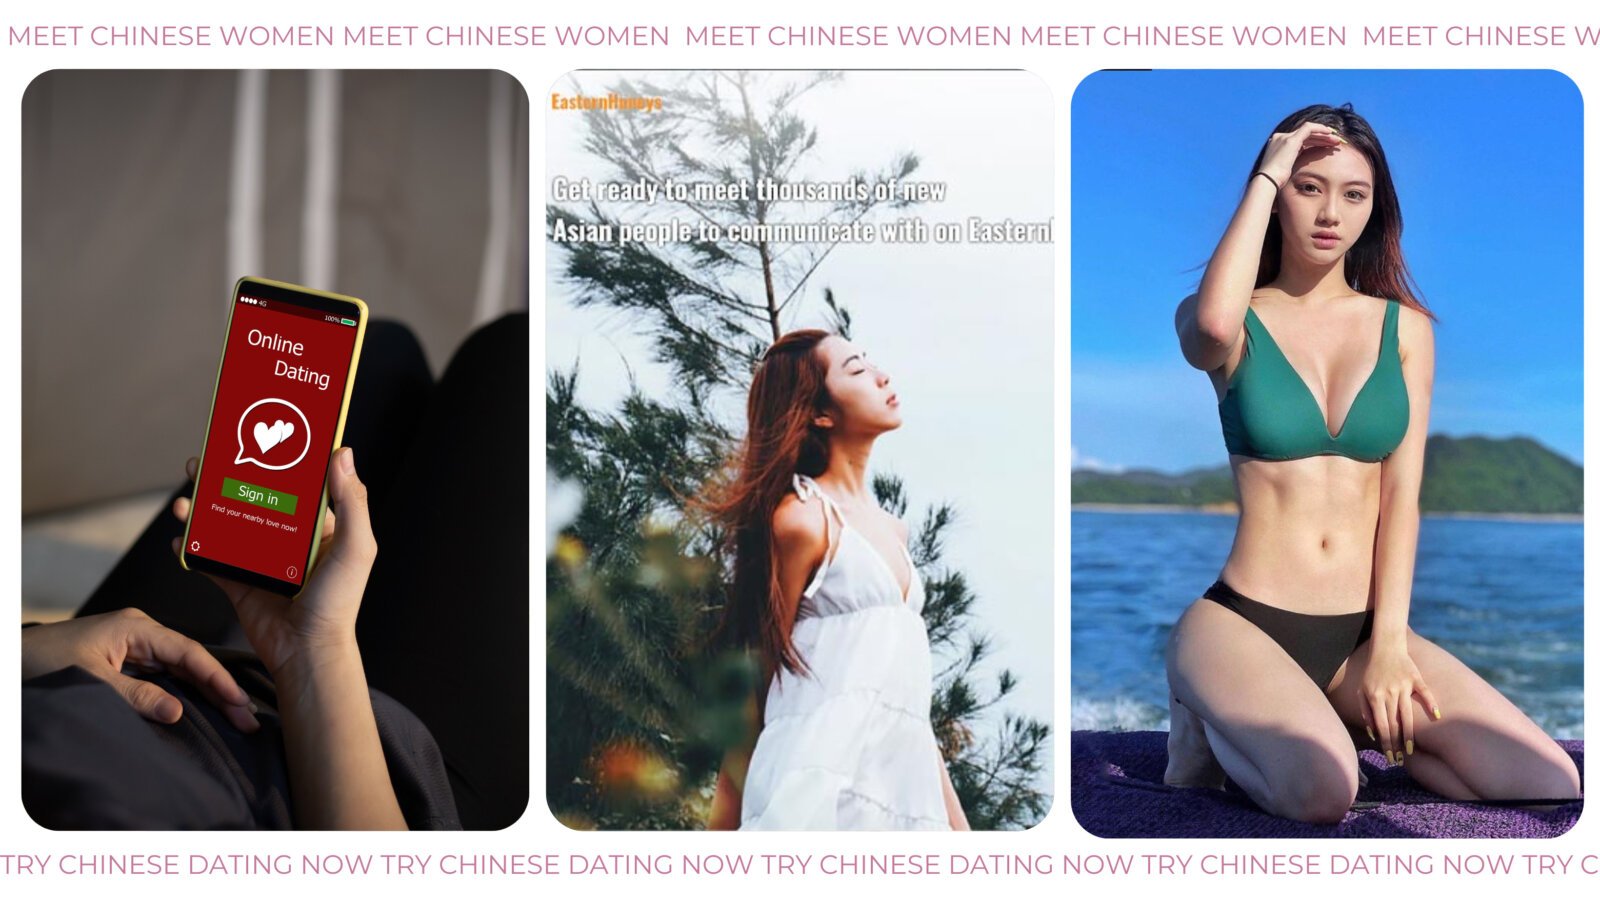 meet Chinese women on Online dating sites